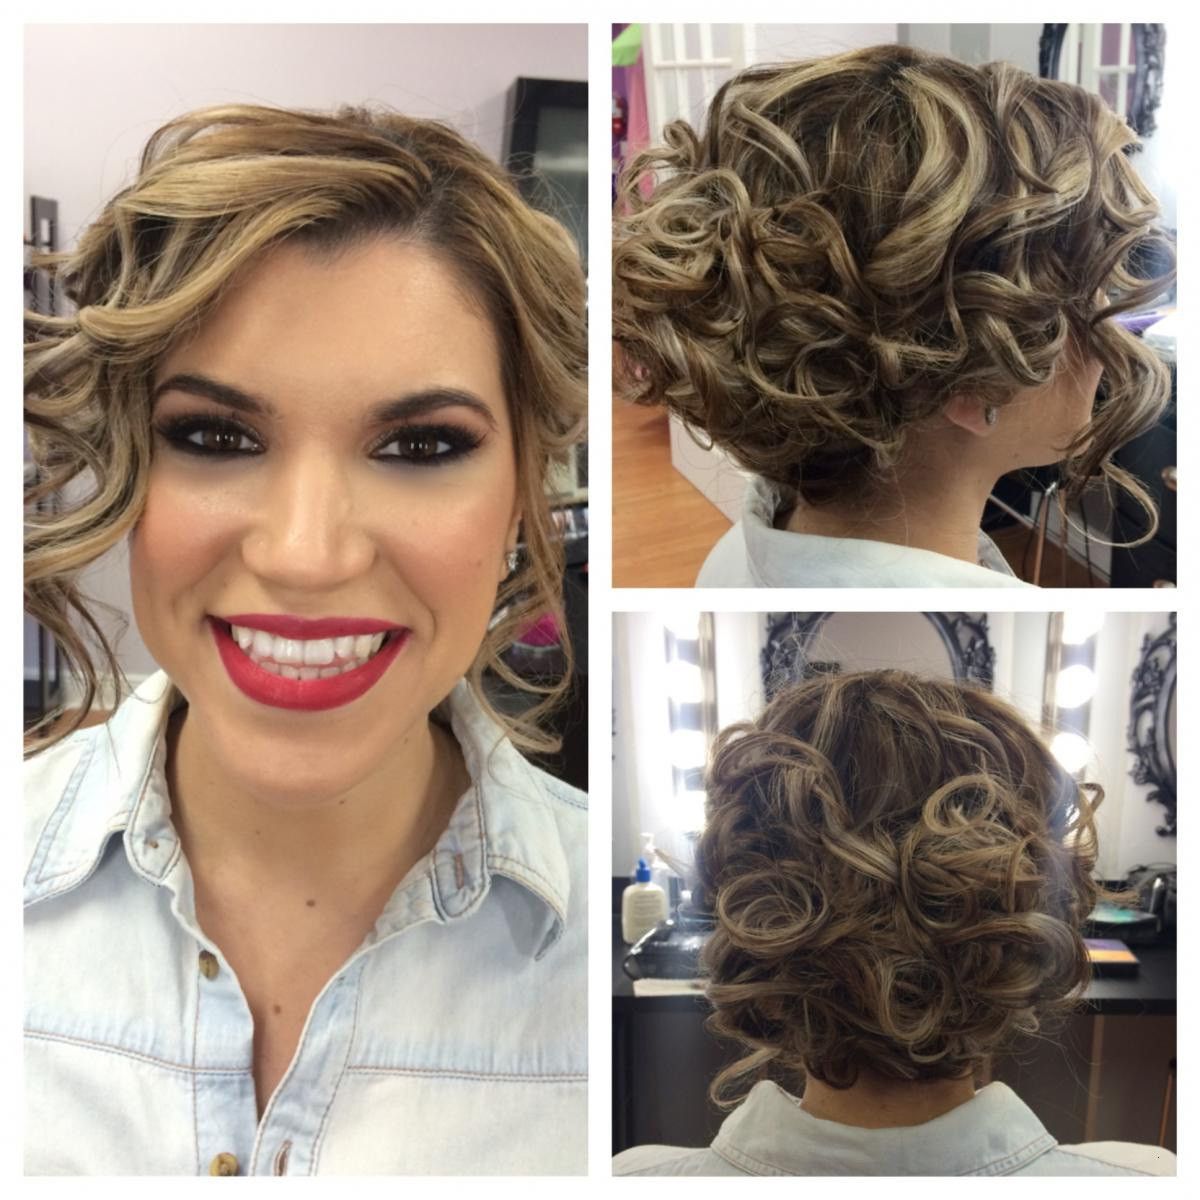 Elegant Wedding Guest Hairstyles For Short Hair – Aidasmakeup Pertaining To Hairstyles For Short Hair For Wedding Guest (View 16 of 25)